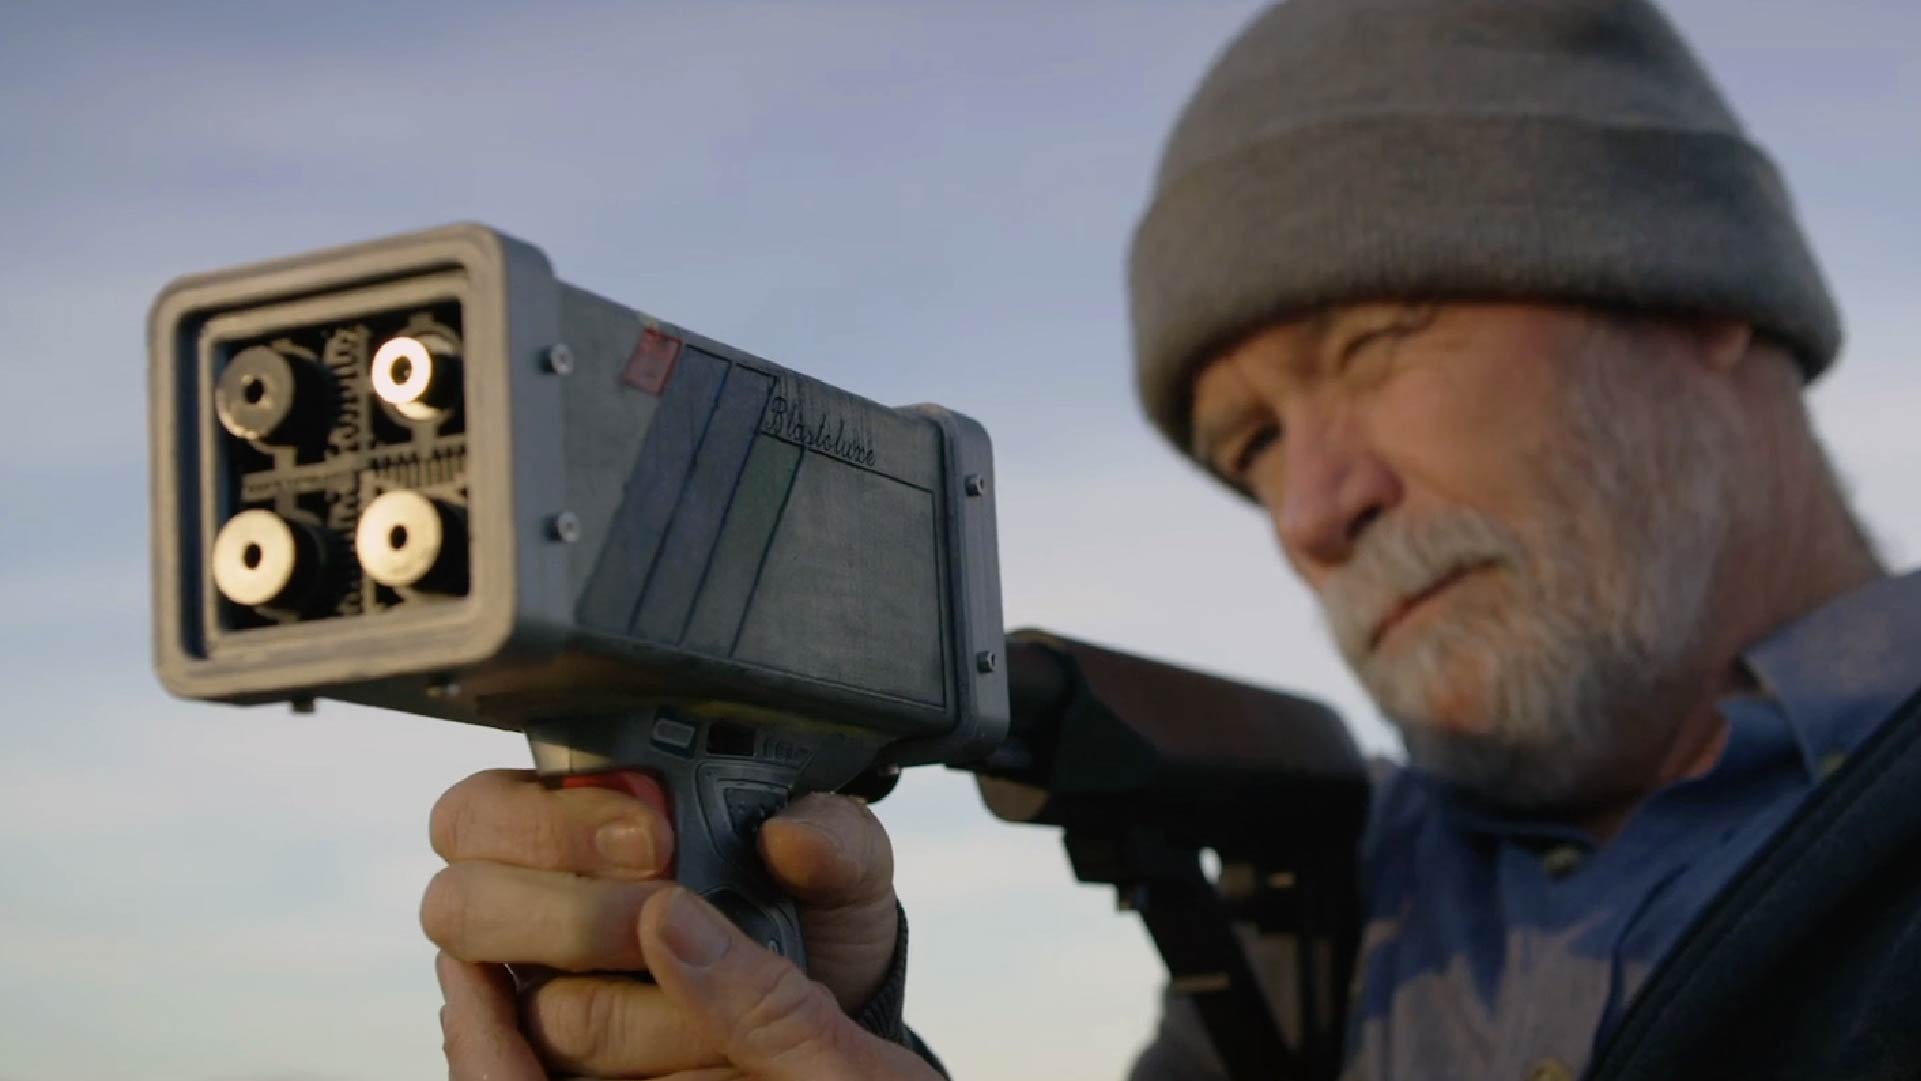 An individual, likely a mature adult given the visible gray beard and wrinkles, is aiming a high-tech drone suppression device. The device is held up to their face, and their focused gaze is directed towards the target. They are wearing a gray beanie and a dark jacket, and the background is softly blurred with a clear sky, indicating an outdoor setting during the day. The device's detailed mechanics are visible, emphasizing a the advanced technology.